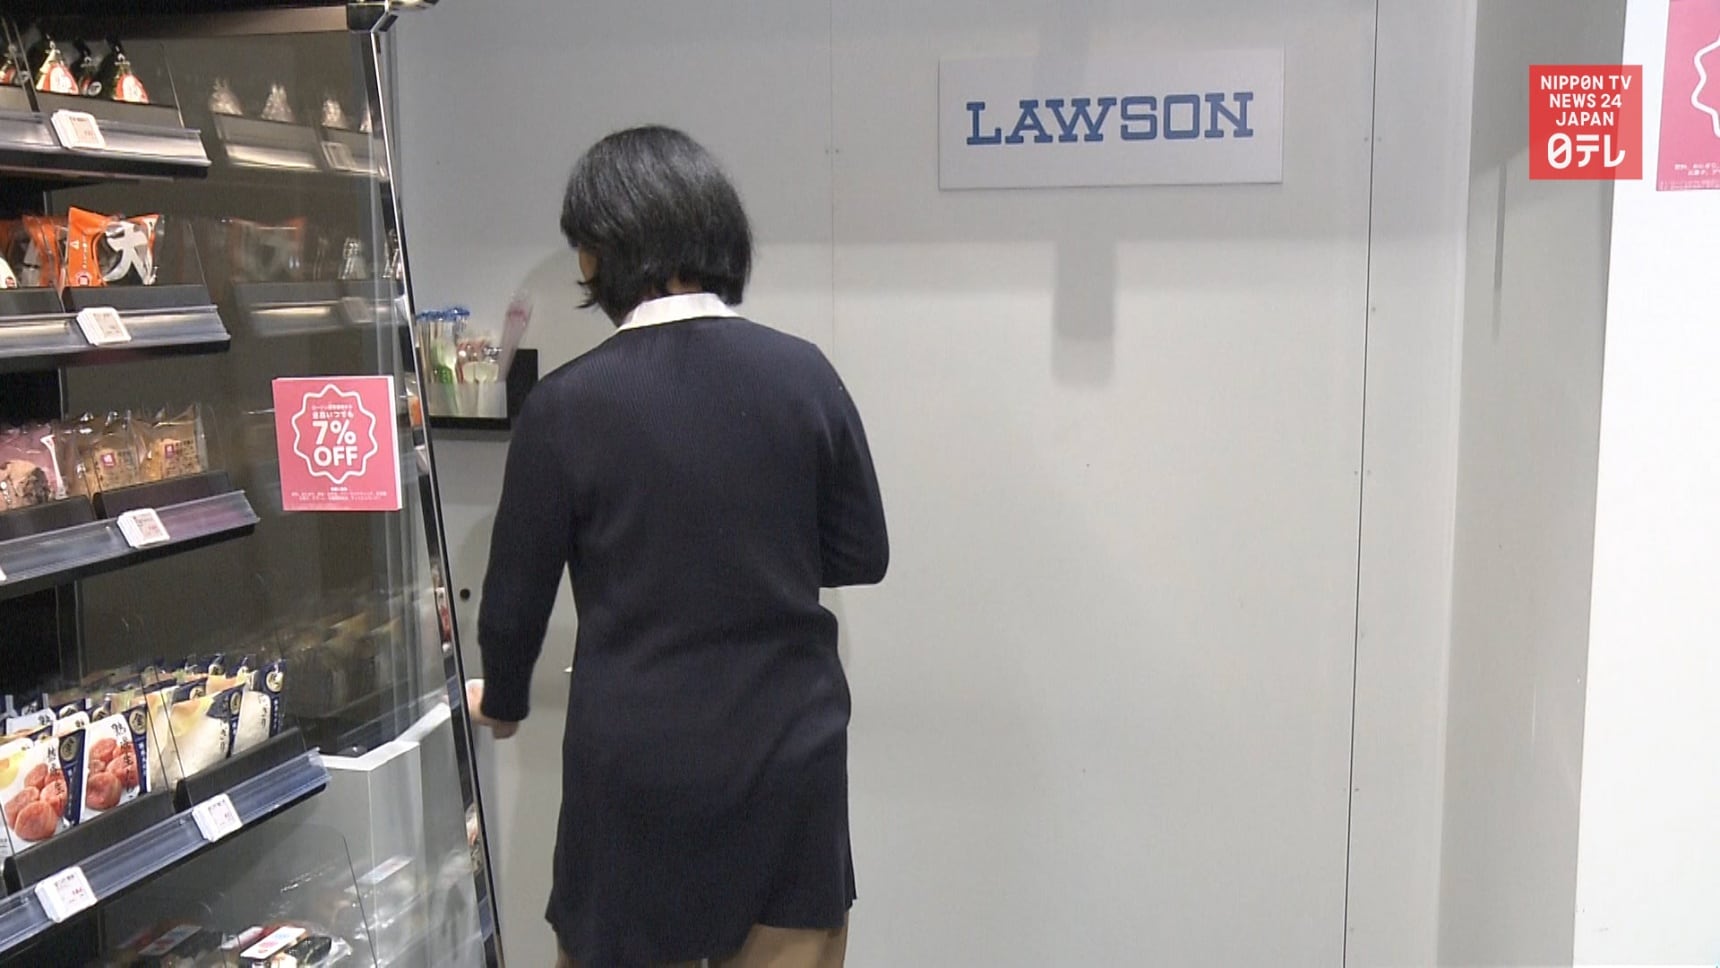 Lawson’s First Register-Free Store